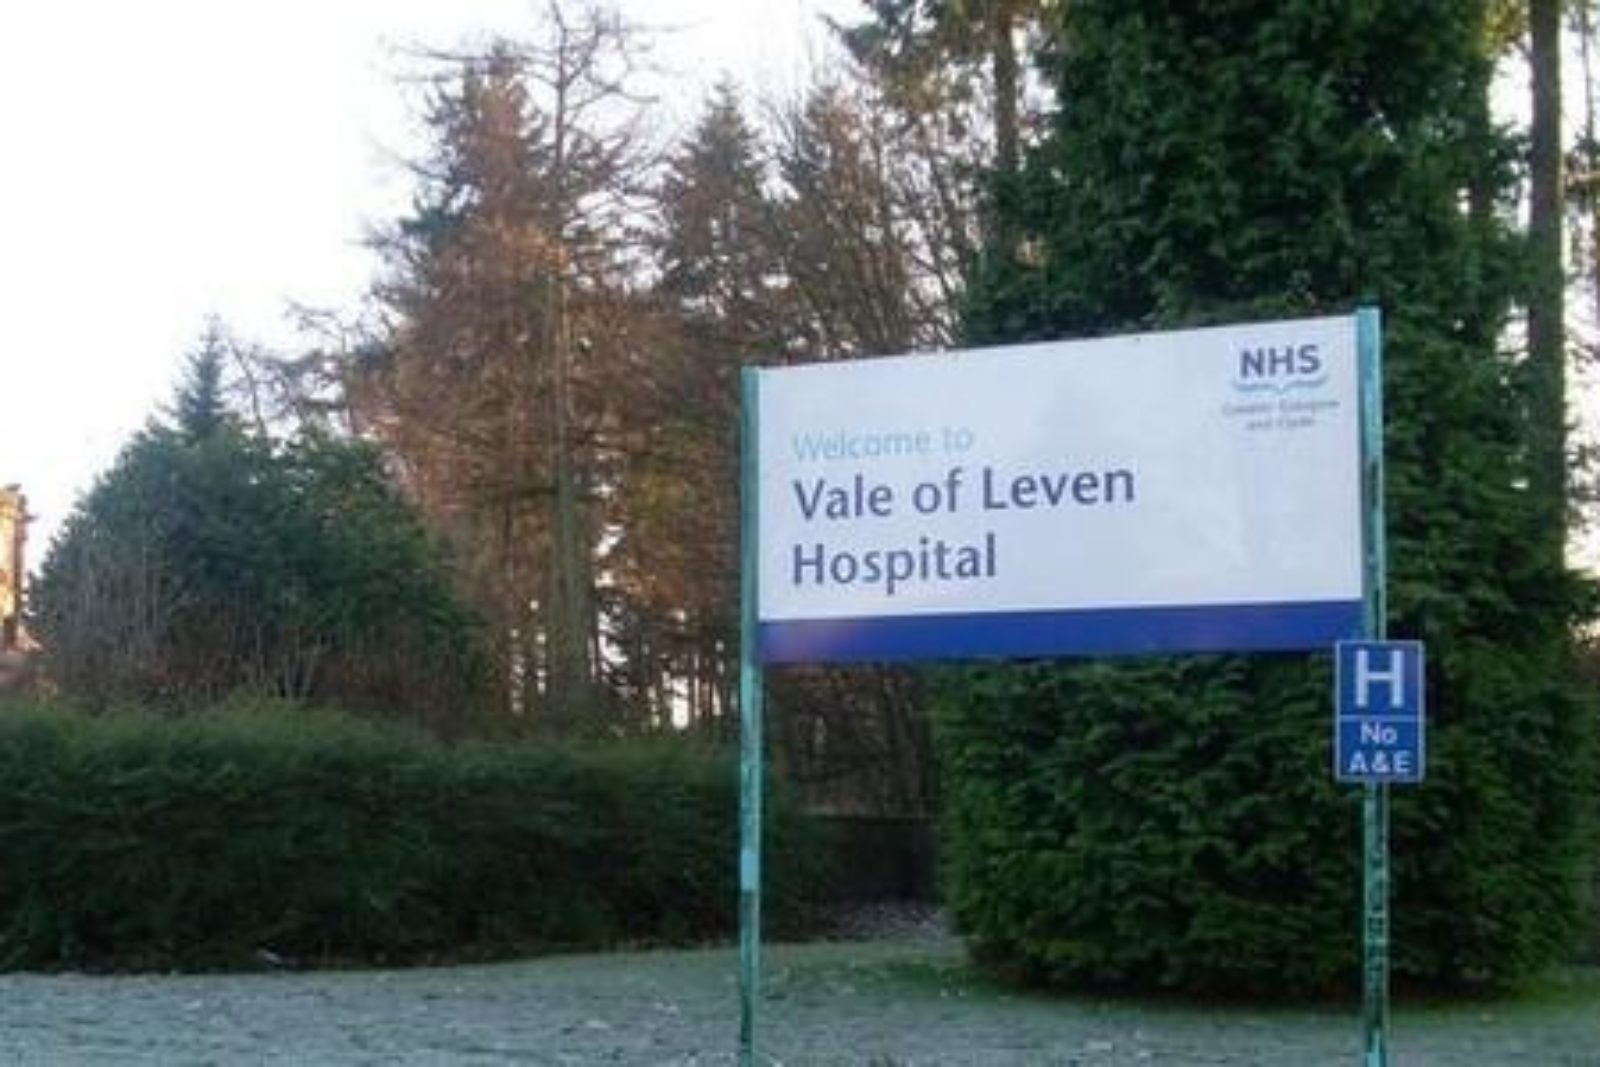 Vale of Leven